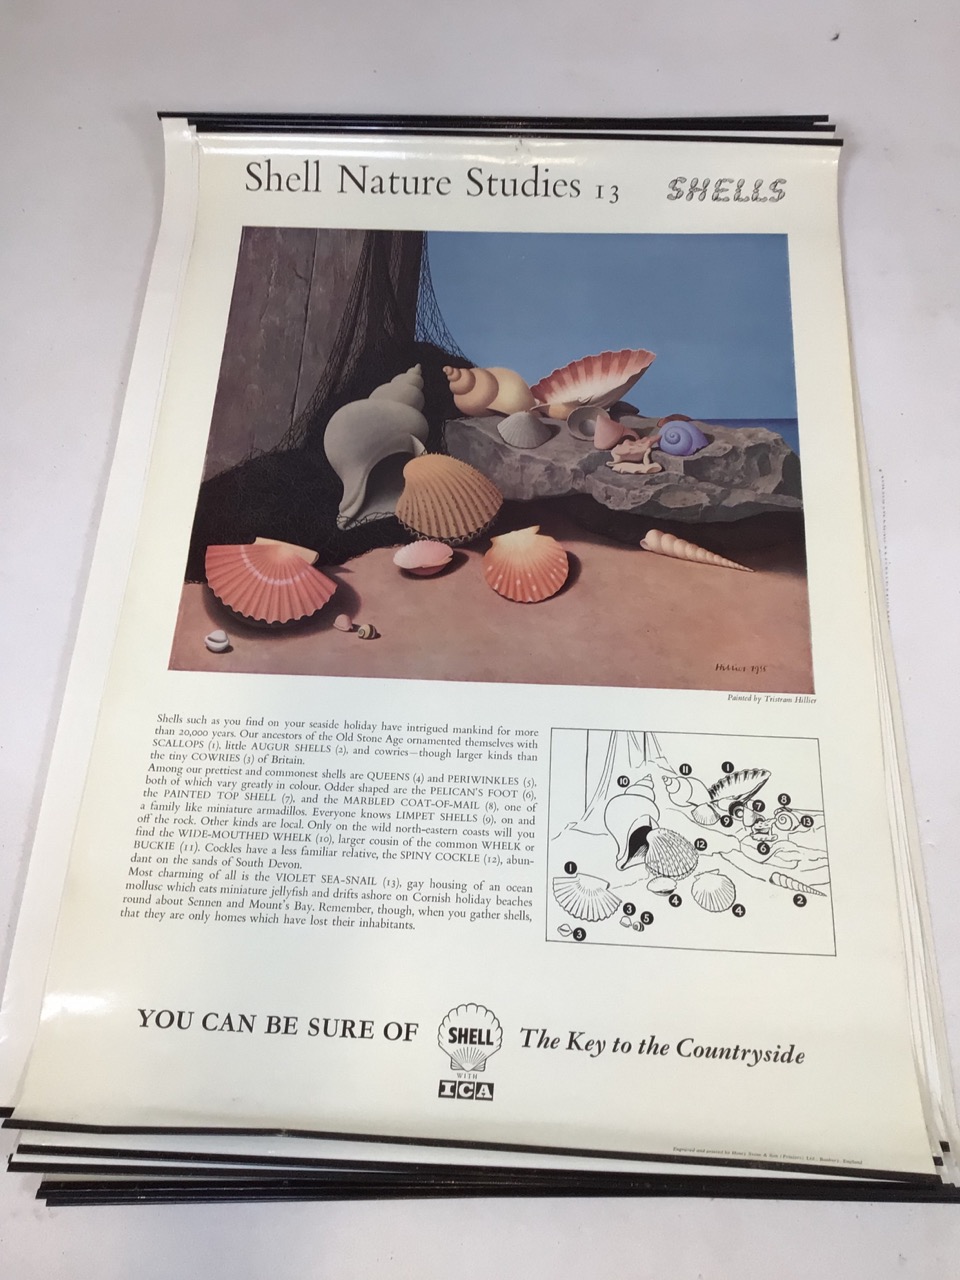 Shell Nature Studies vintage mid century Educational wildlife posters, printed by Henry Stone & Son. - Image 14 of 14